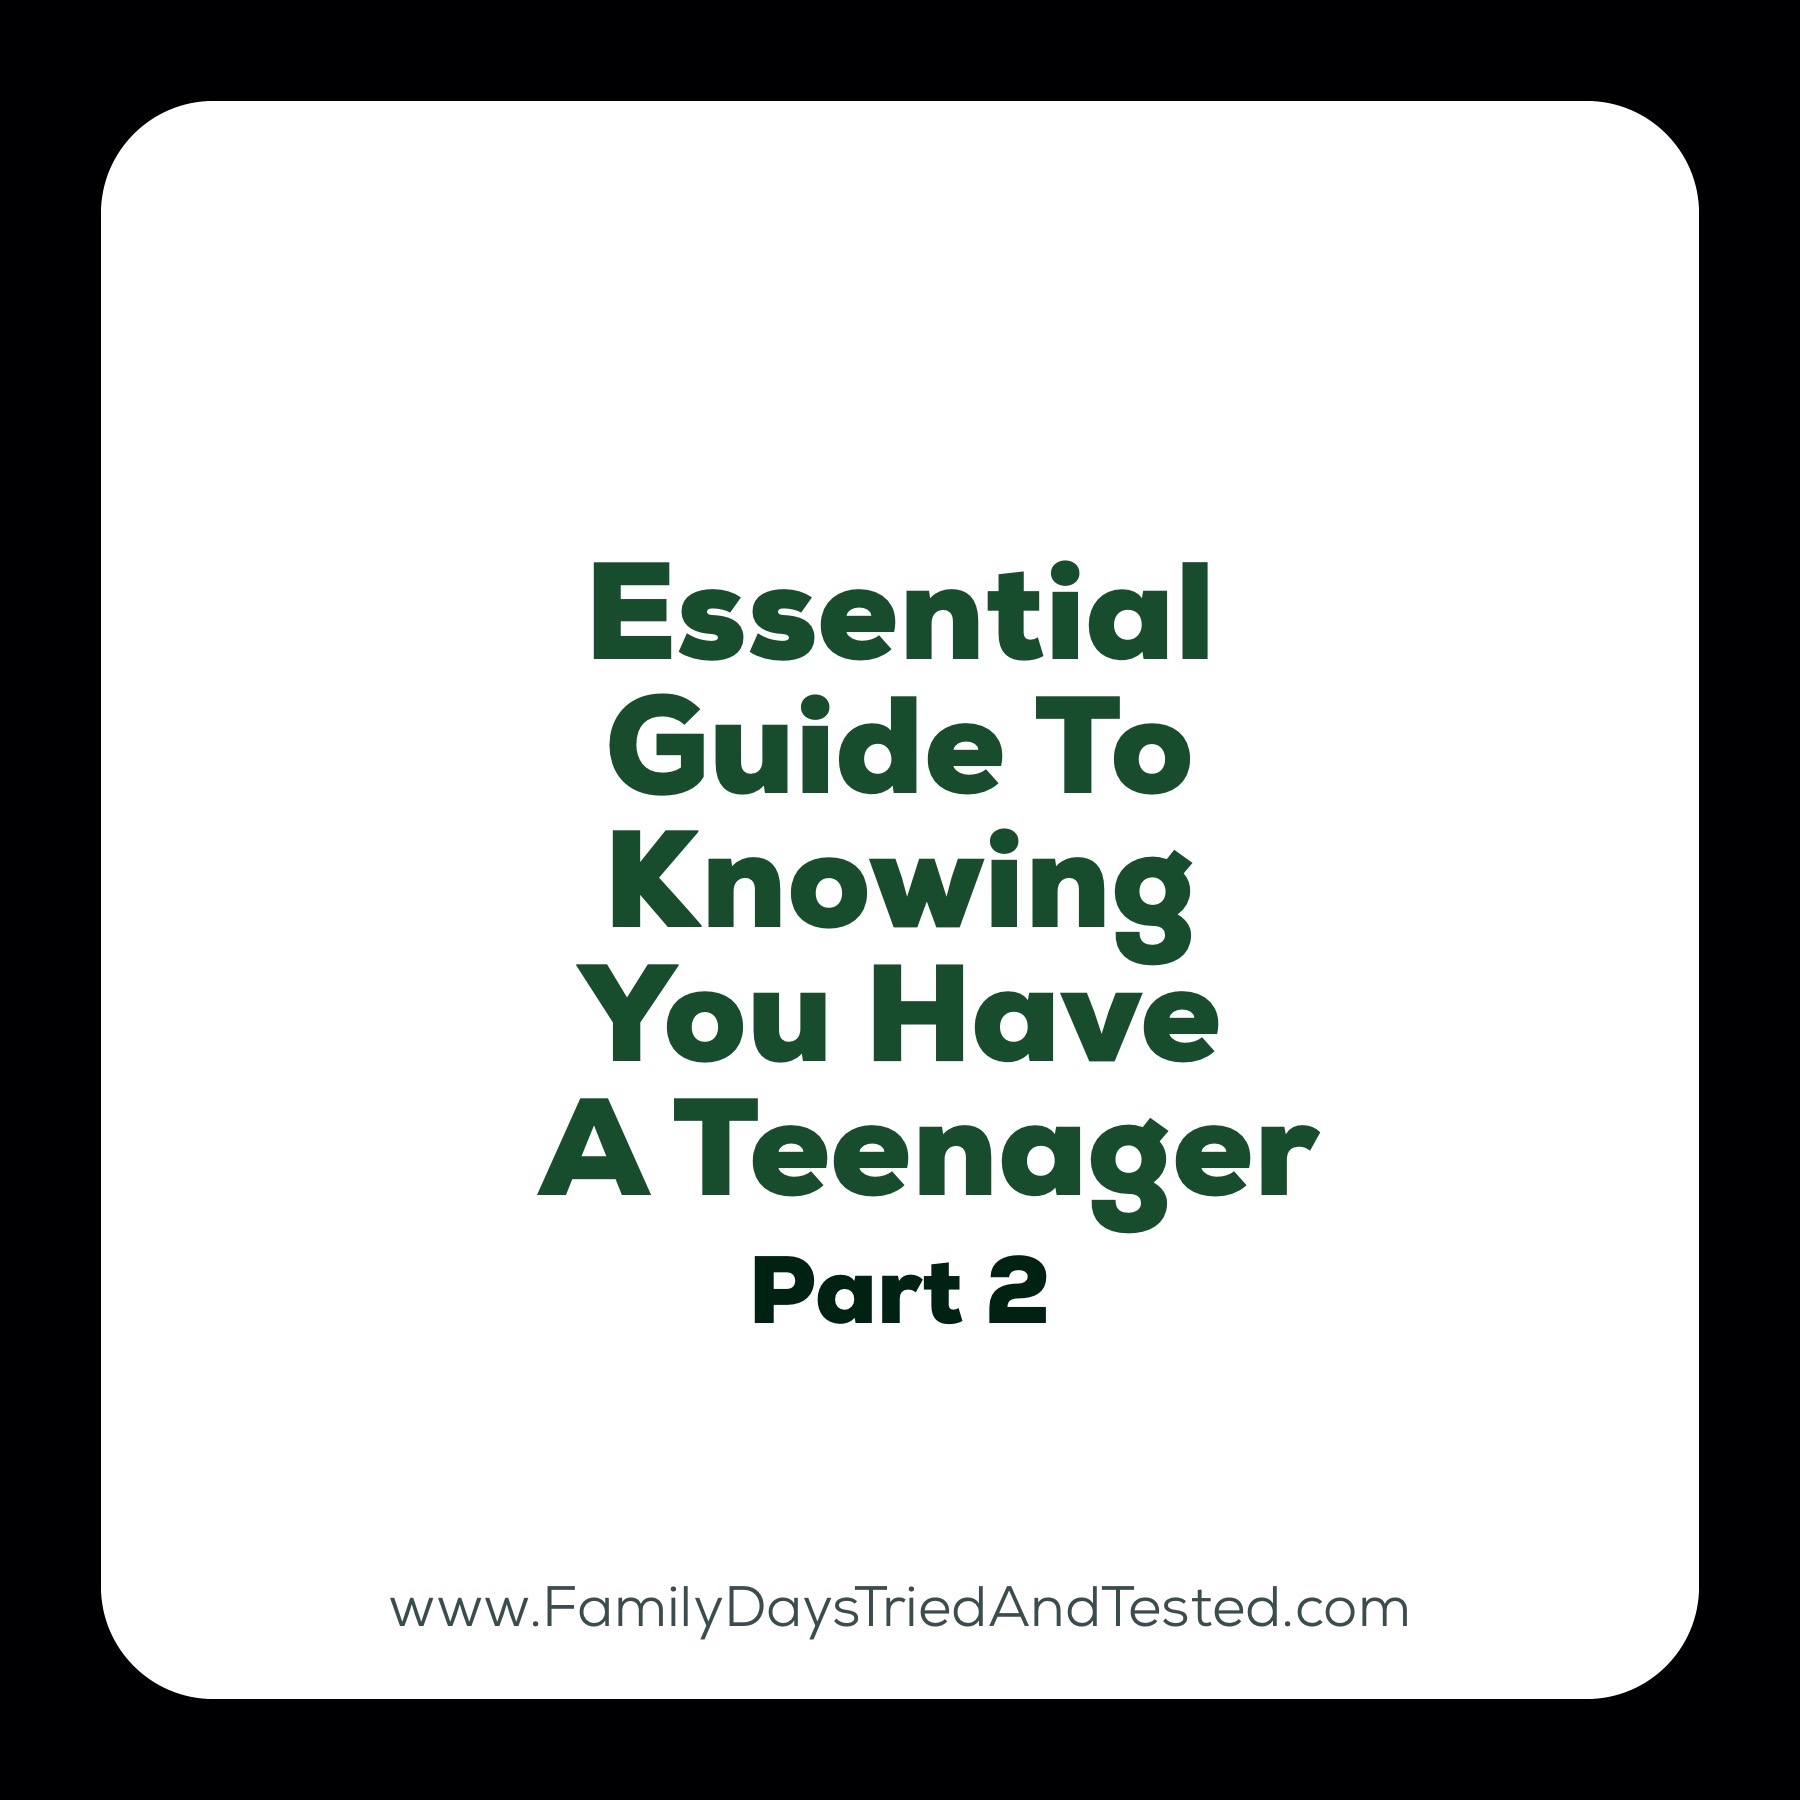 Essential Guide To Knowing You Have A Teenager- Part 2